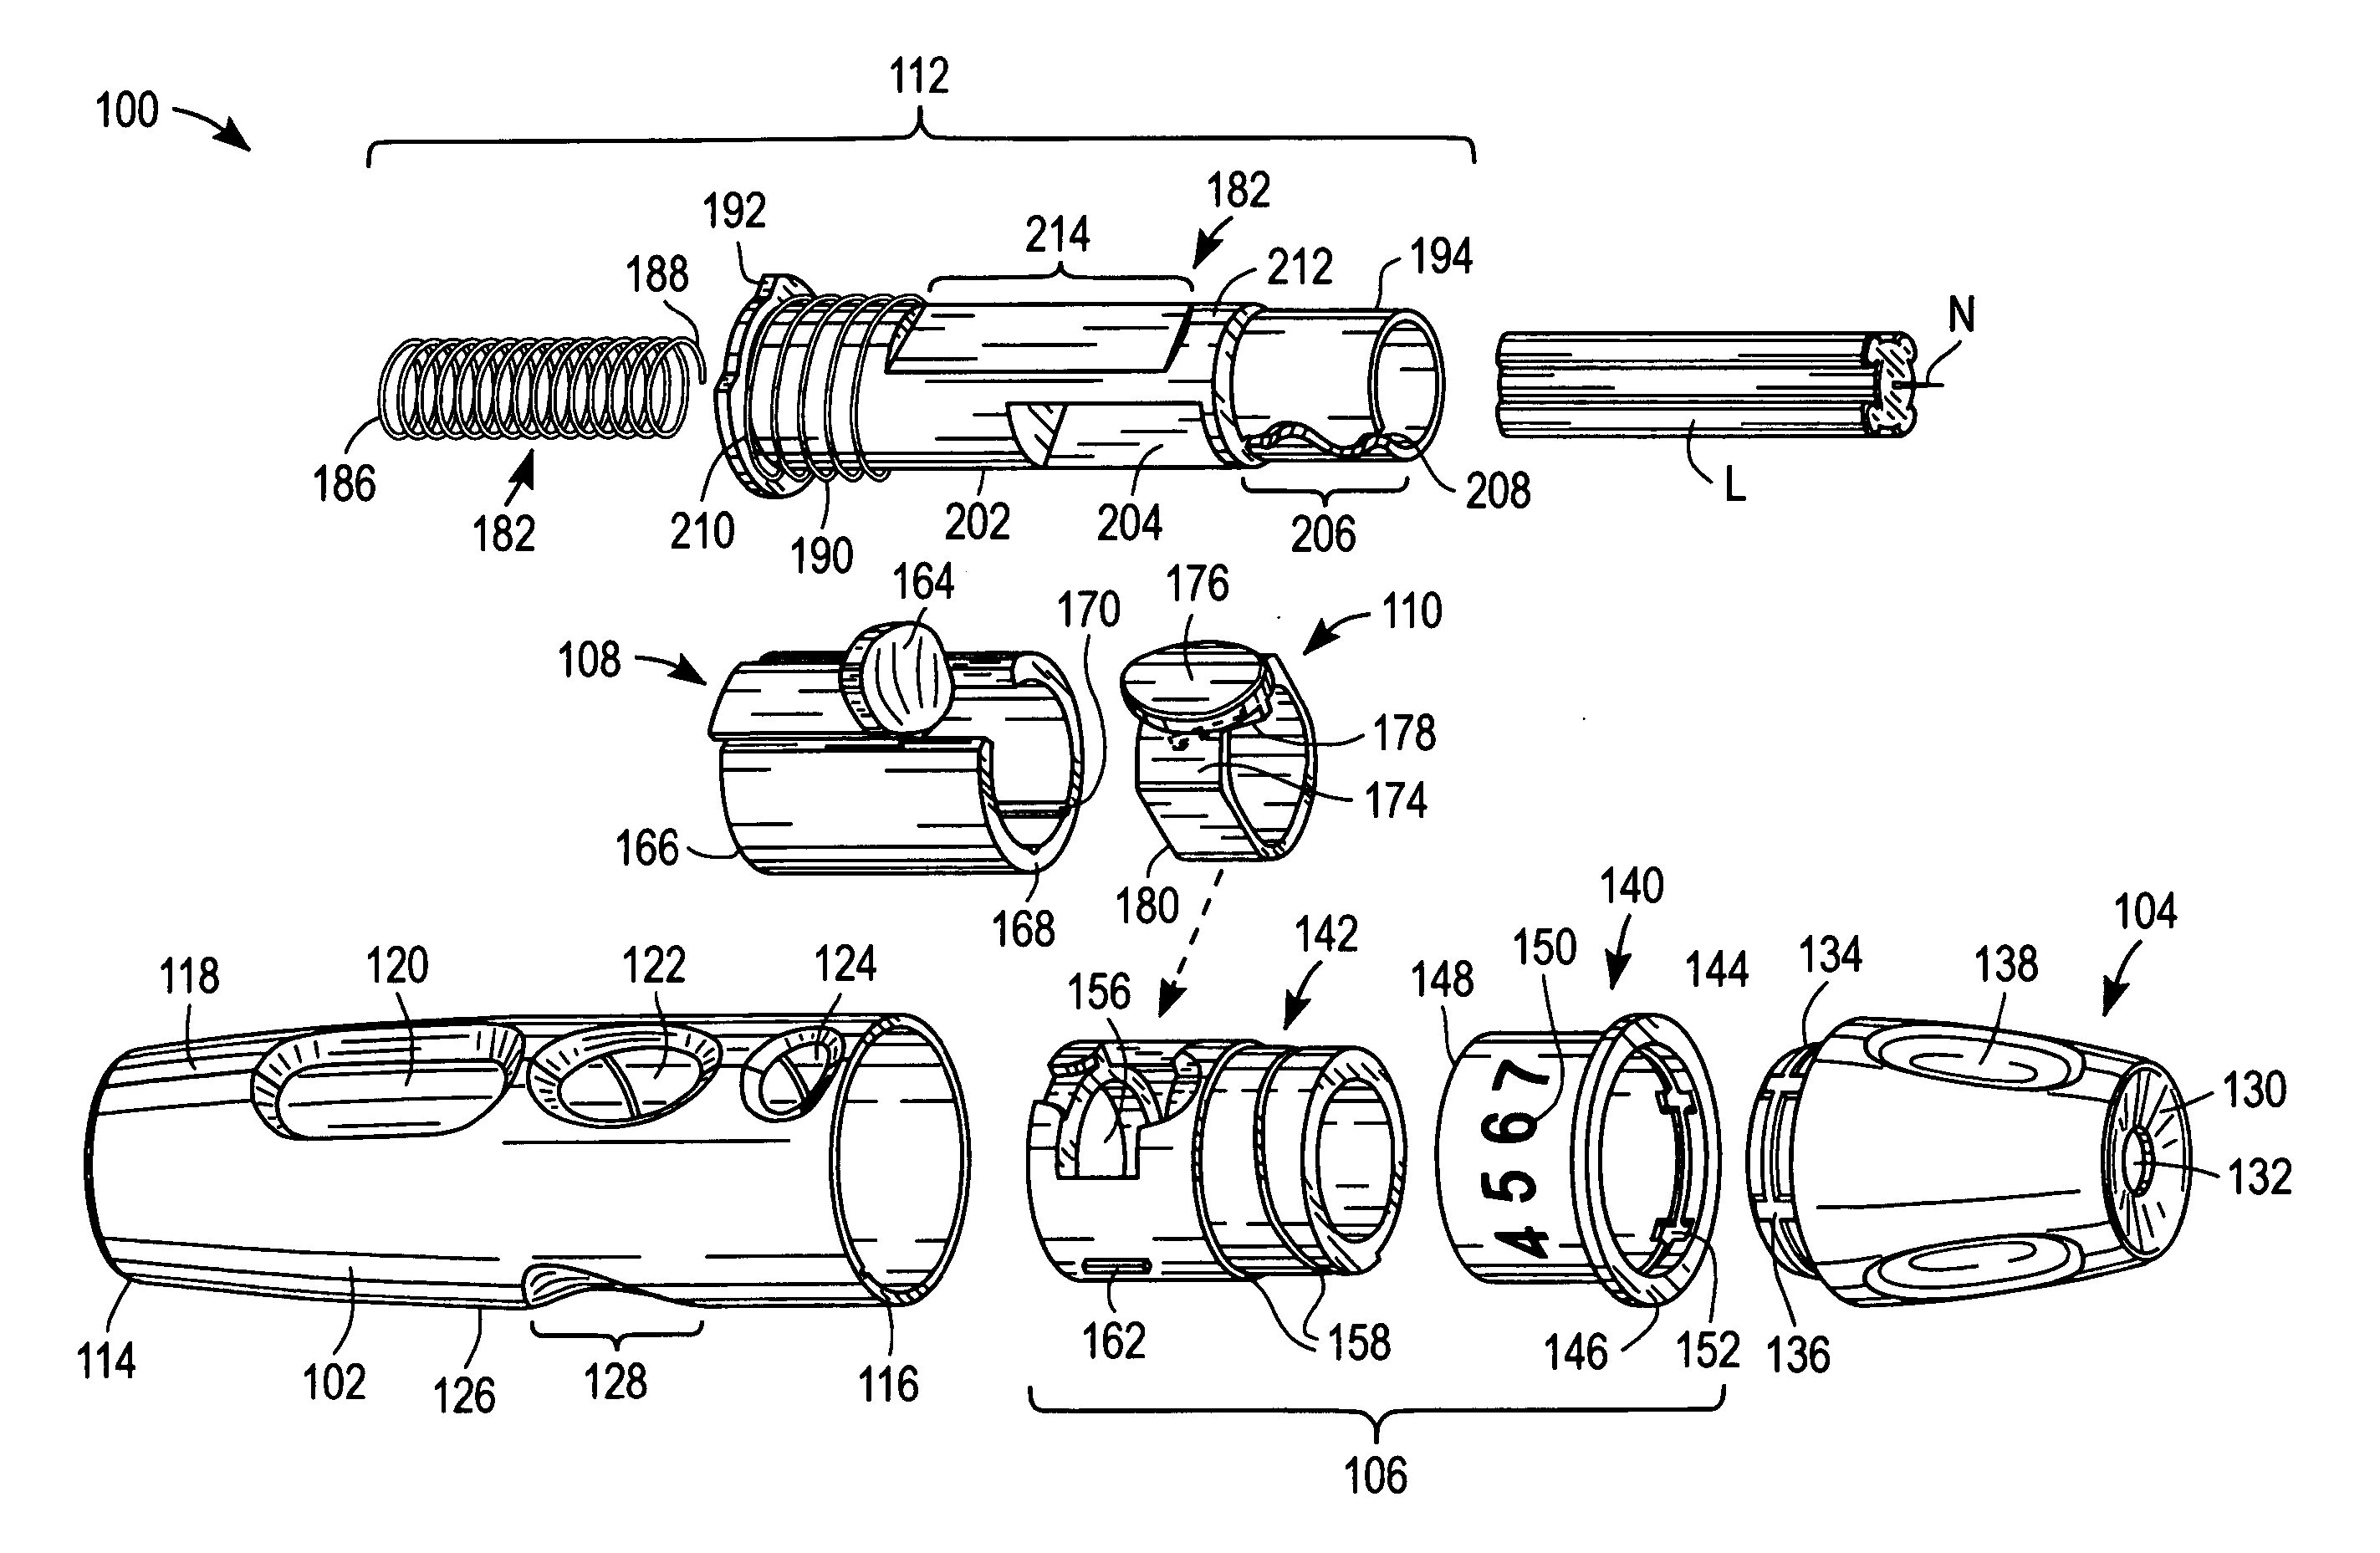 Compact lancing device